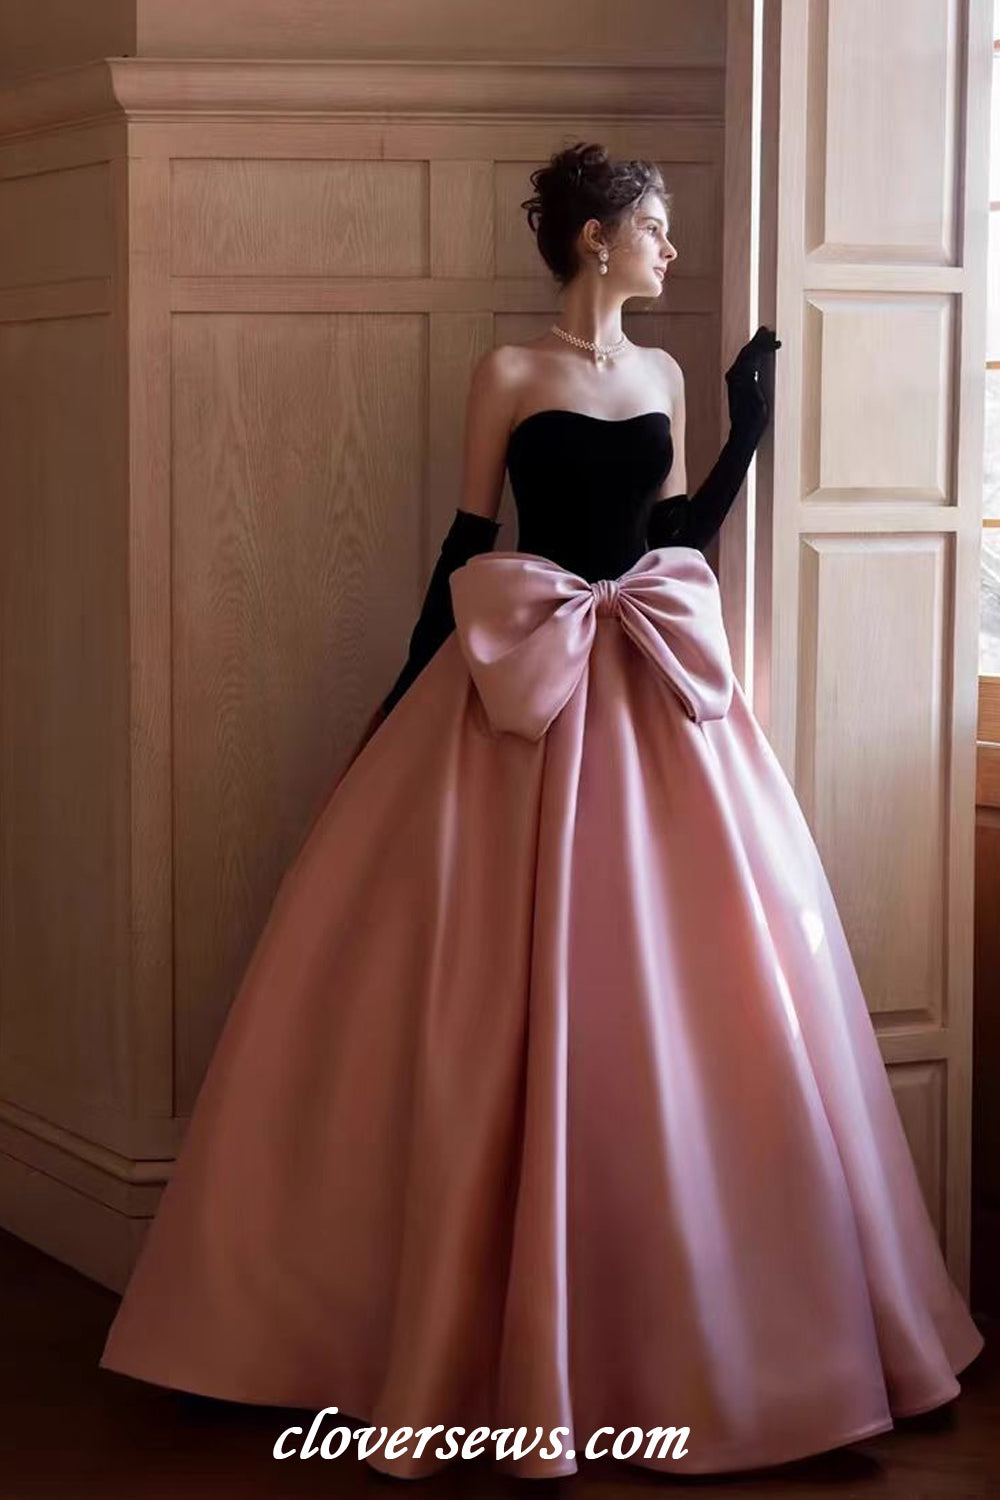 Black Velvet Top Pink Satin With Bowknot Ball Gown Prom Gown With Long Gloves,CP1143